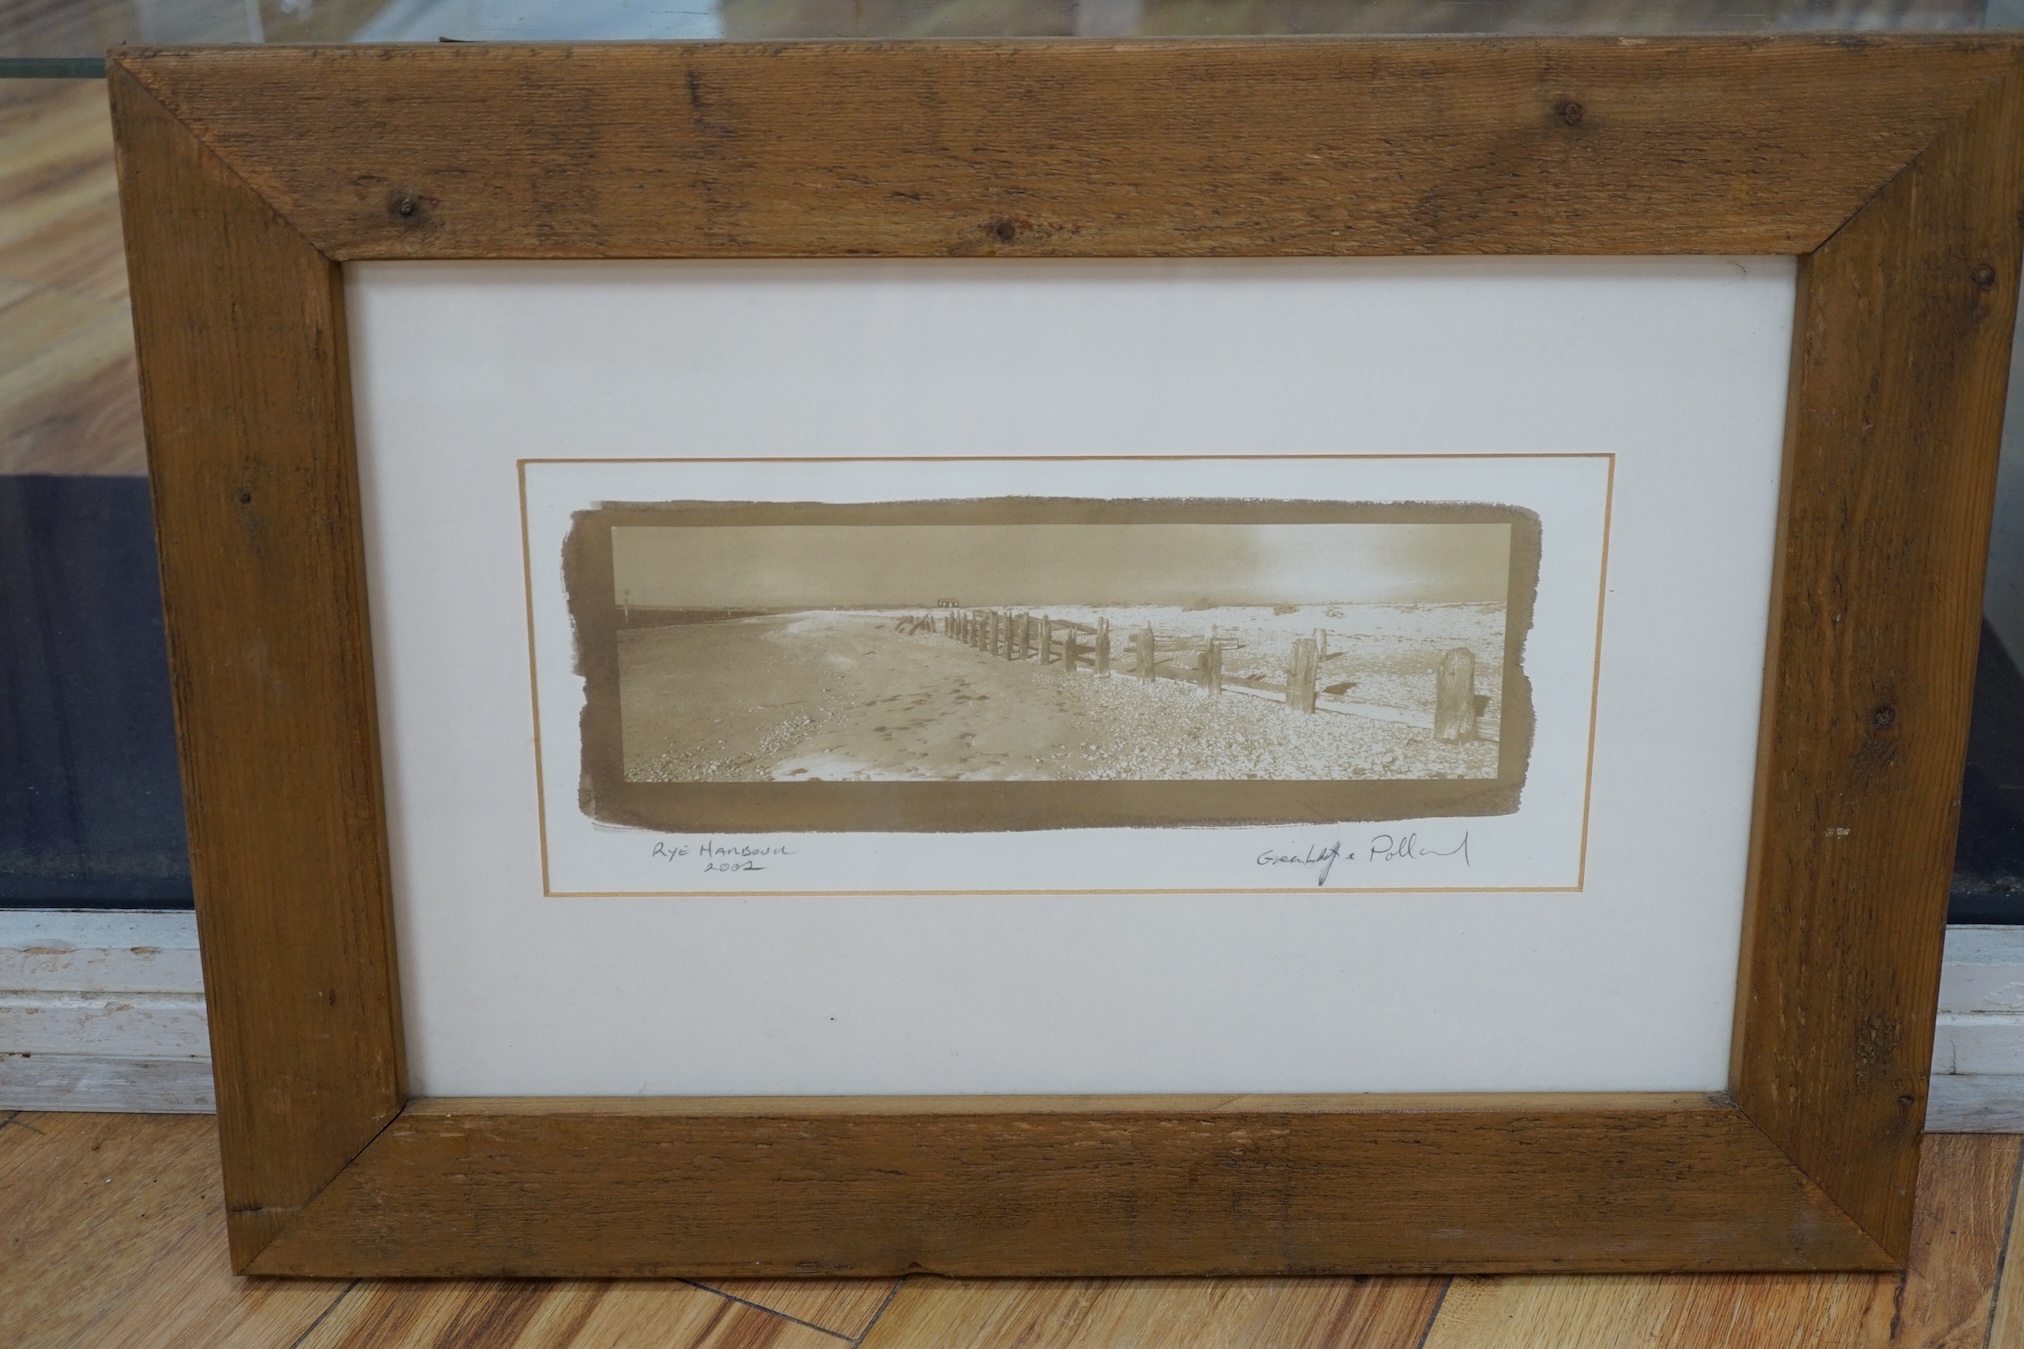 From the Studio of Fred Cuming. Greenhalf & Pollard, monochrome print, Rye Harbour, Vandyke print, signed and dated 2002 in pencil, 14 x 31cm. Condition - fair-good